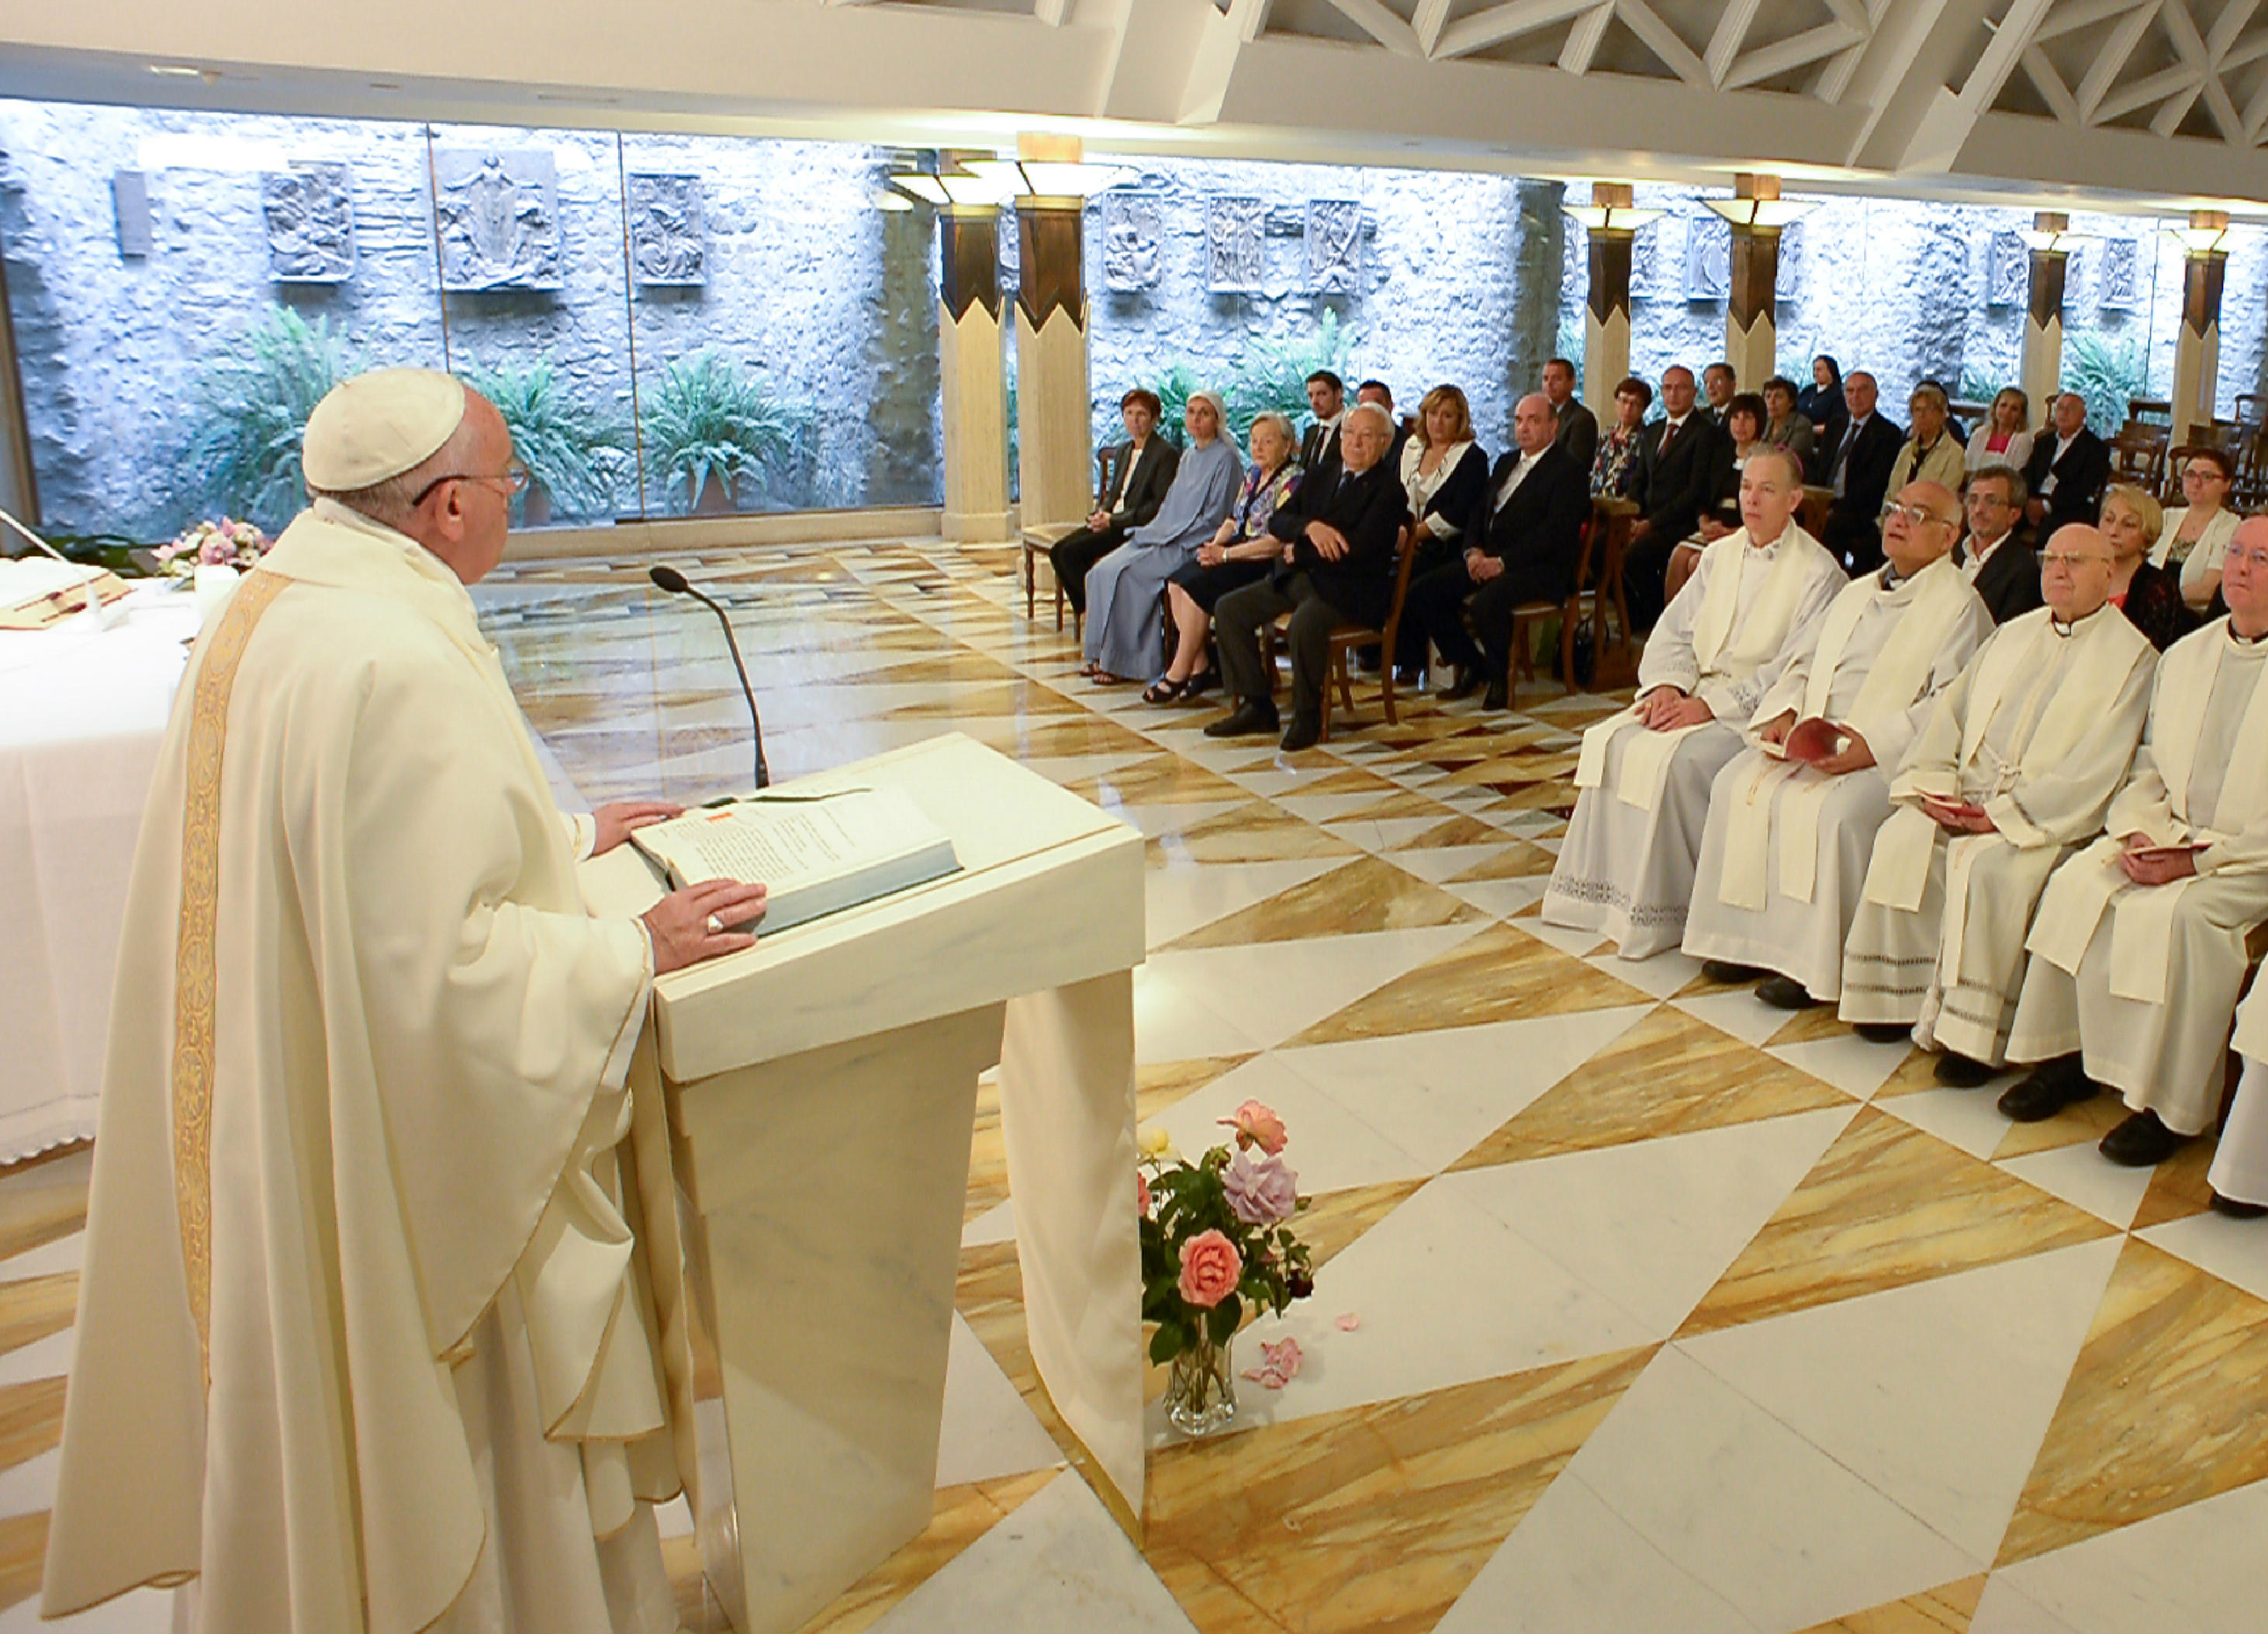 Pope Francis delivers his homily in Santa Marta